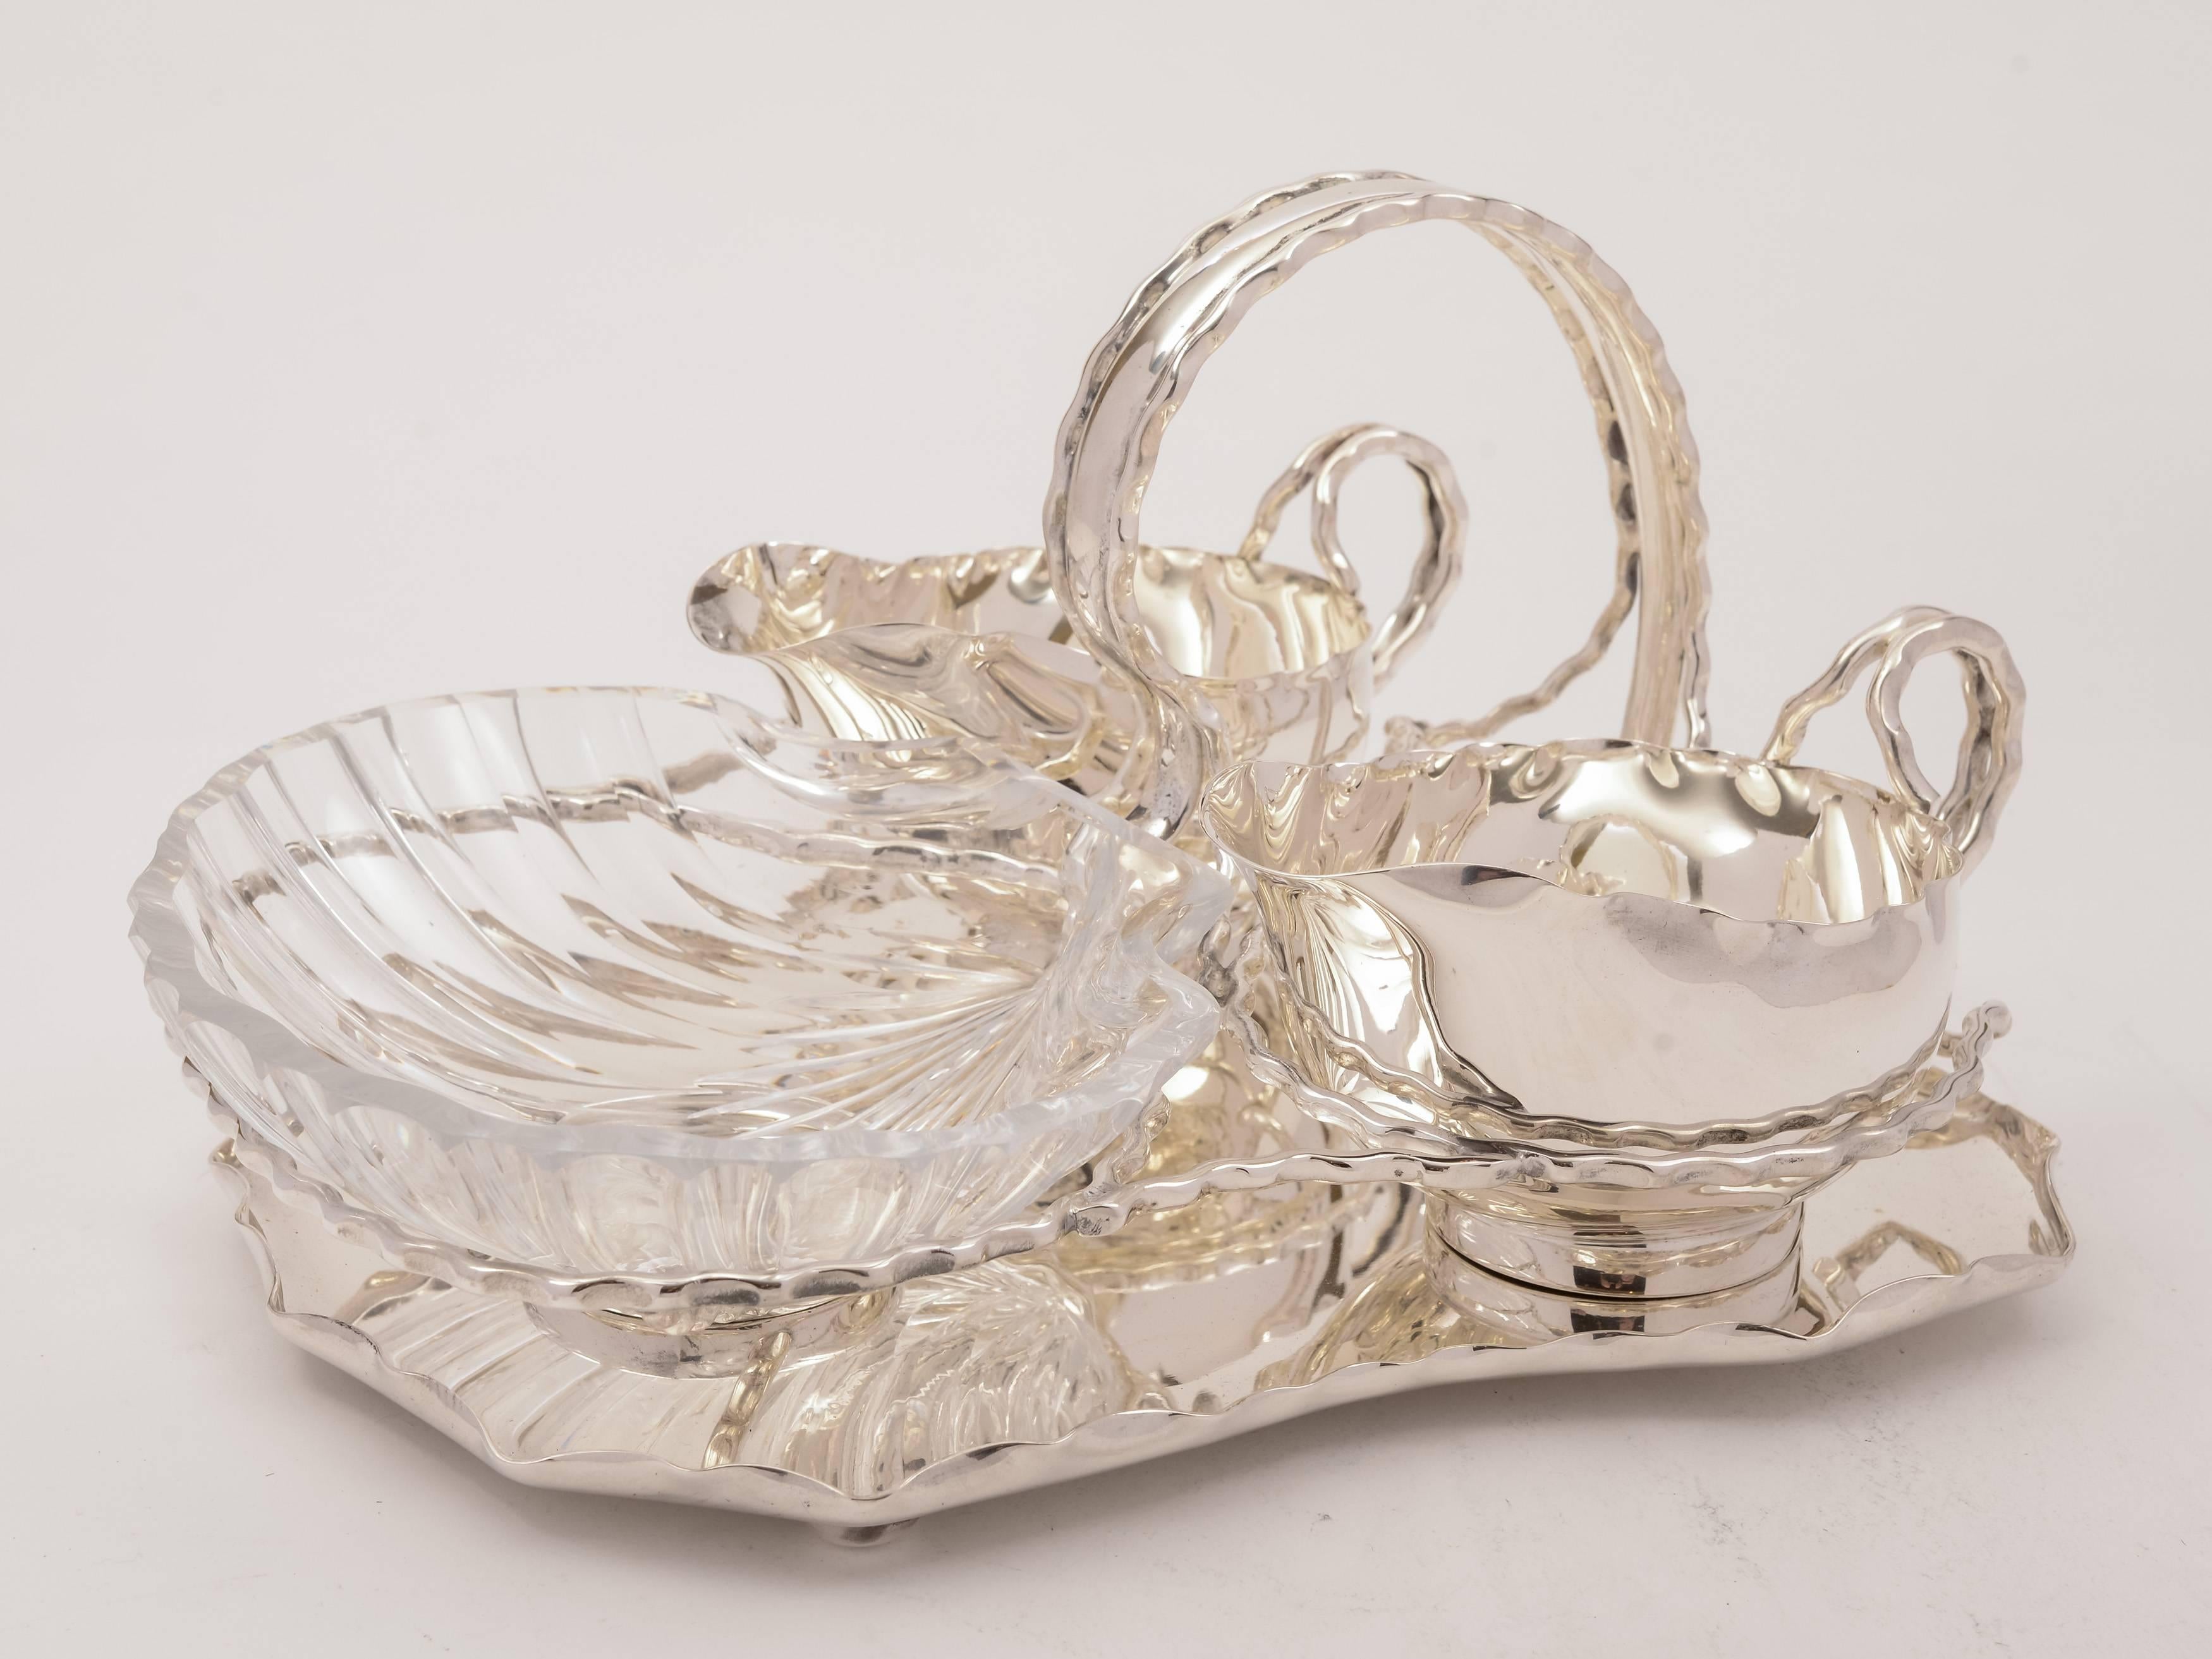 A very unusual English Victorian seafood serving set comprising of X2 silver plated sauce boats and a cut-glass, scallop shaped dish all of which sit in a silver plated serving caddy with handle, circa 1890 and marked 'H & H' for the renowned maker